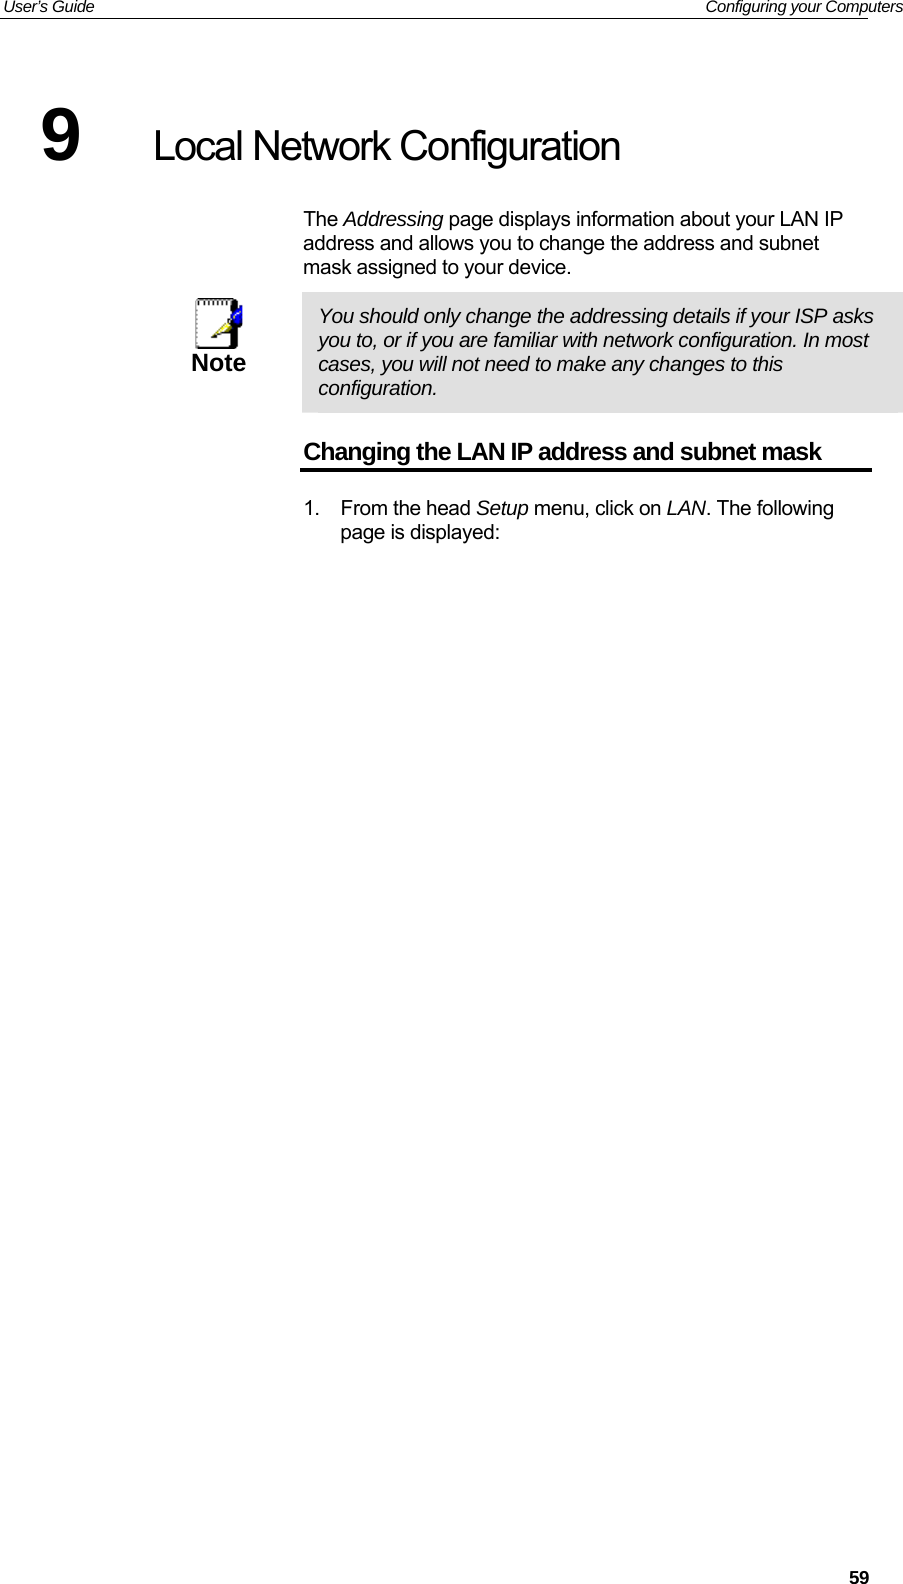 User’s Guide   Configuring your Computers 9  Local Network Configuration The Addressing page displays information about your LAN IP address and allows you to change the address and subnet mask assigned to your device.  Note  You should only change the addressing details if your ISP asks you to, or if you are familiar with network configuration. In most cases, you will not need to make any changes to this configuration. Changing the LAN IP address and subnet mask 1. From the head Setup menu, click on LAN. The following page is displayed:  59